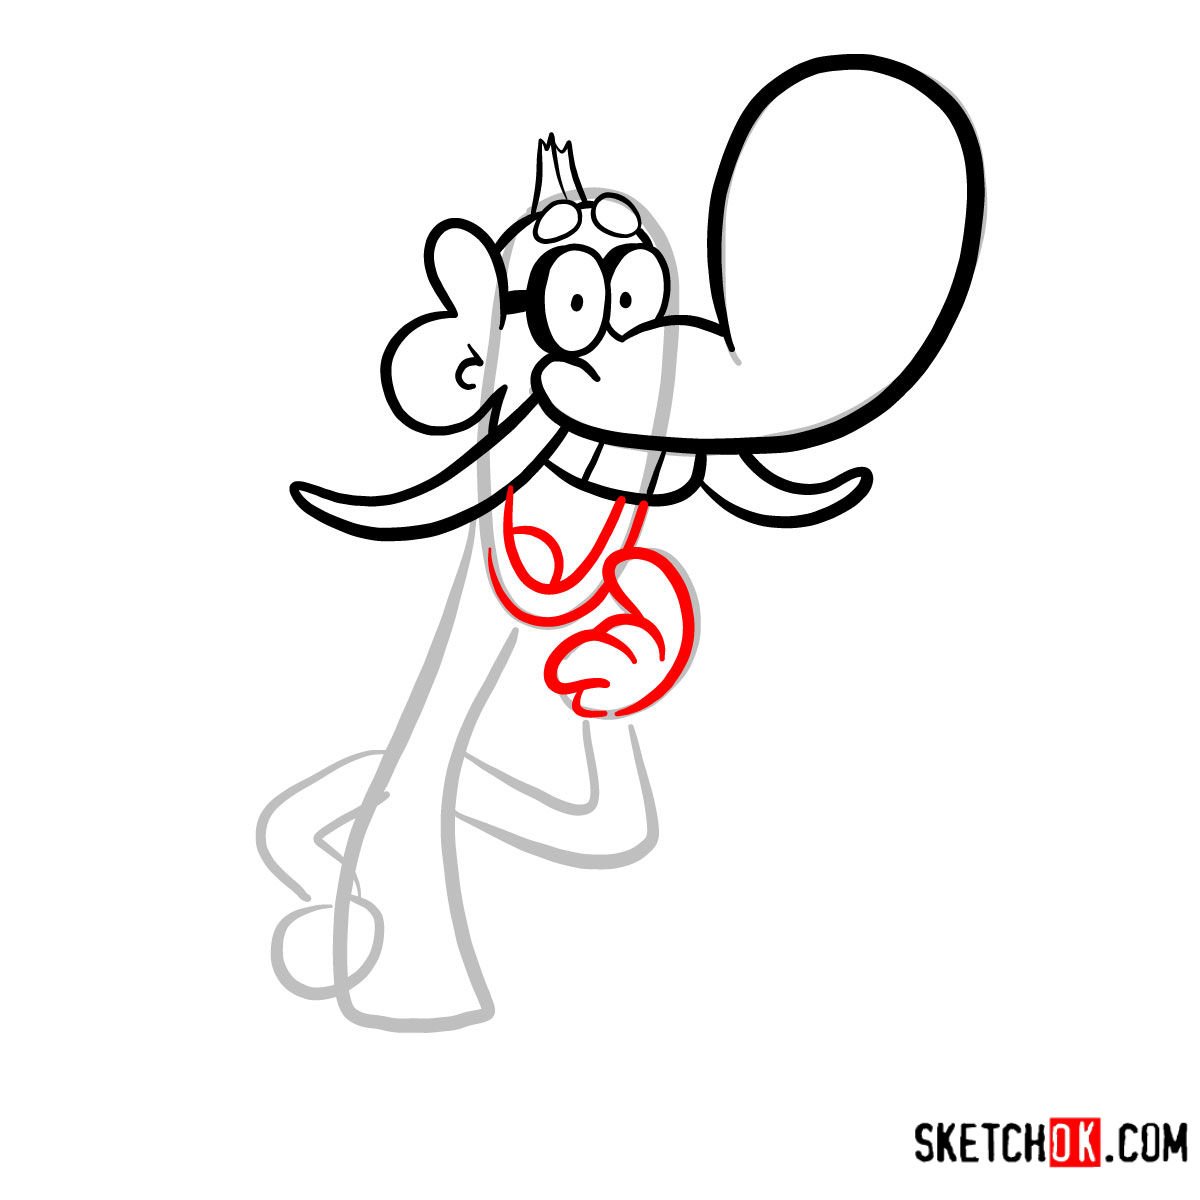 How to draw Mung Daal from Chowder series - step 05